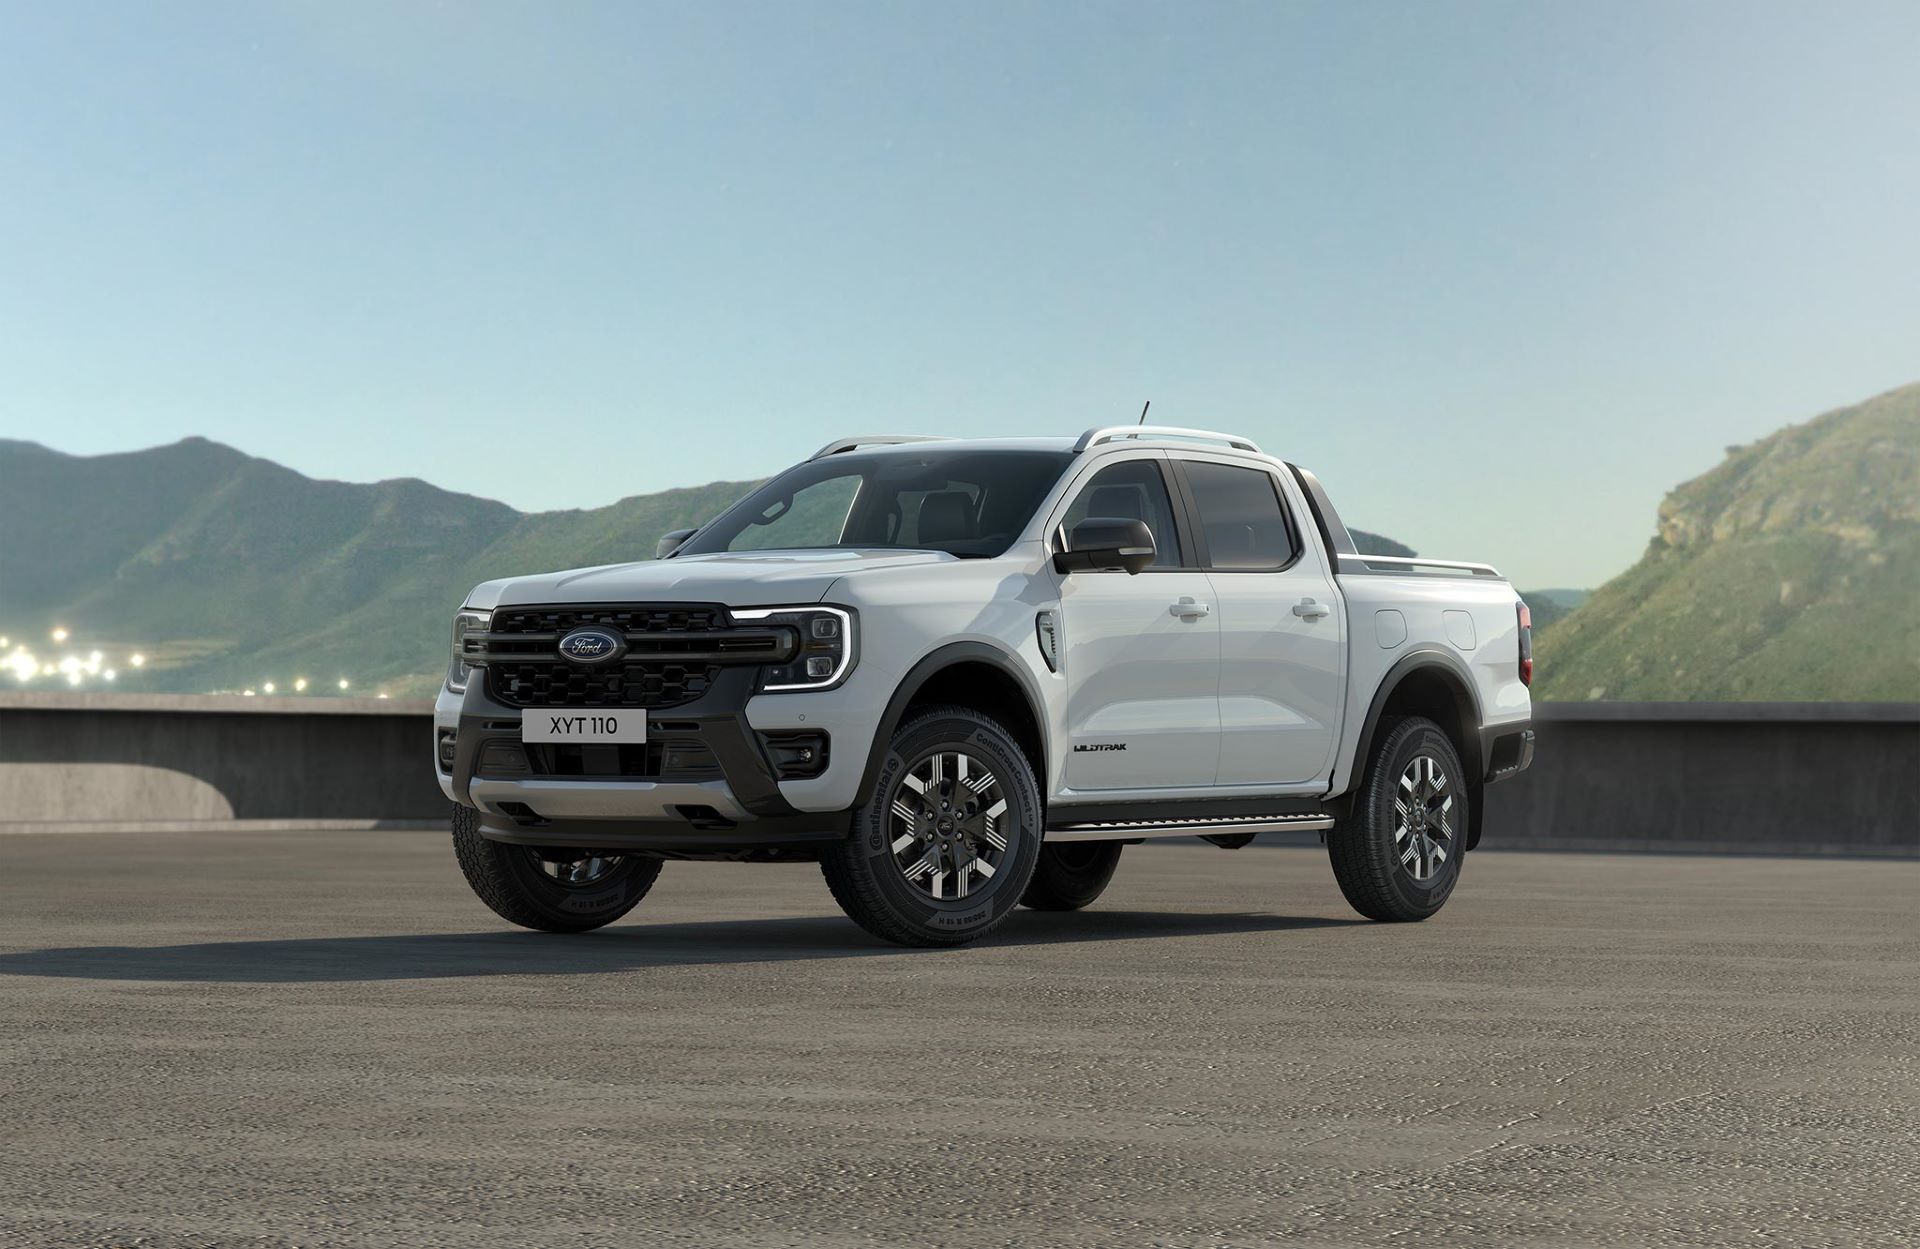 Ford Expands Ranger Family with First Ever Ranger Plug-in Hybrid, including Pro Power Onboard